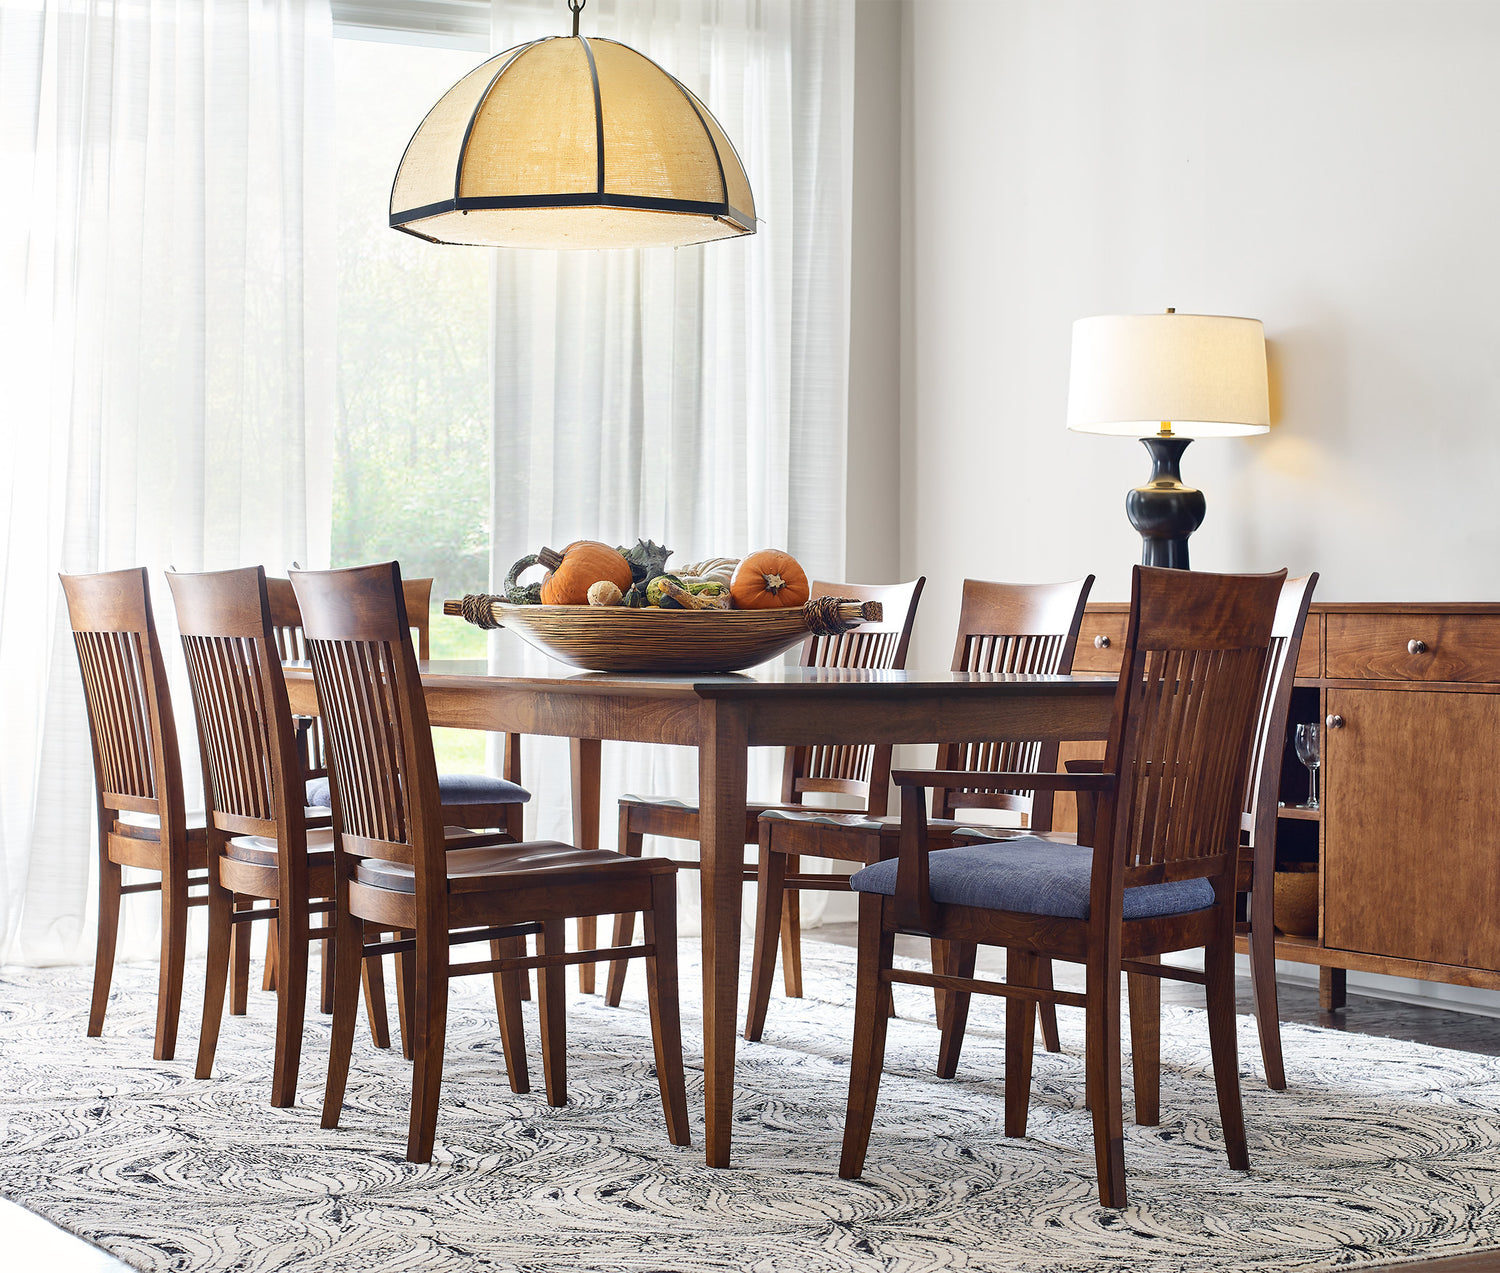 A well-lit dining room featuring a Gable Road Dining Table surrounded by eight Gable Road Chairs with dark blue upholstered seats. A decorative bowl filled with pumpkins and gourds is at the center of the table. Above the table hangs a pendant light with a yellow shade. A Gable Road Large Server with simple, straight lines and a classic table lamp with a white shade is in the background near sheer curtains.